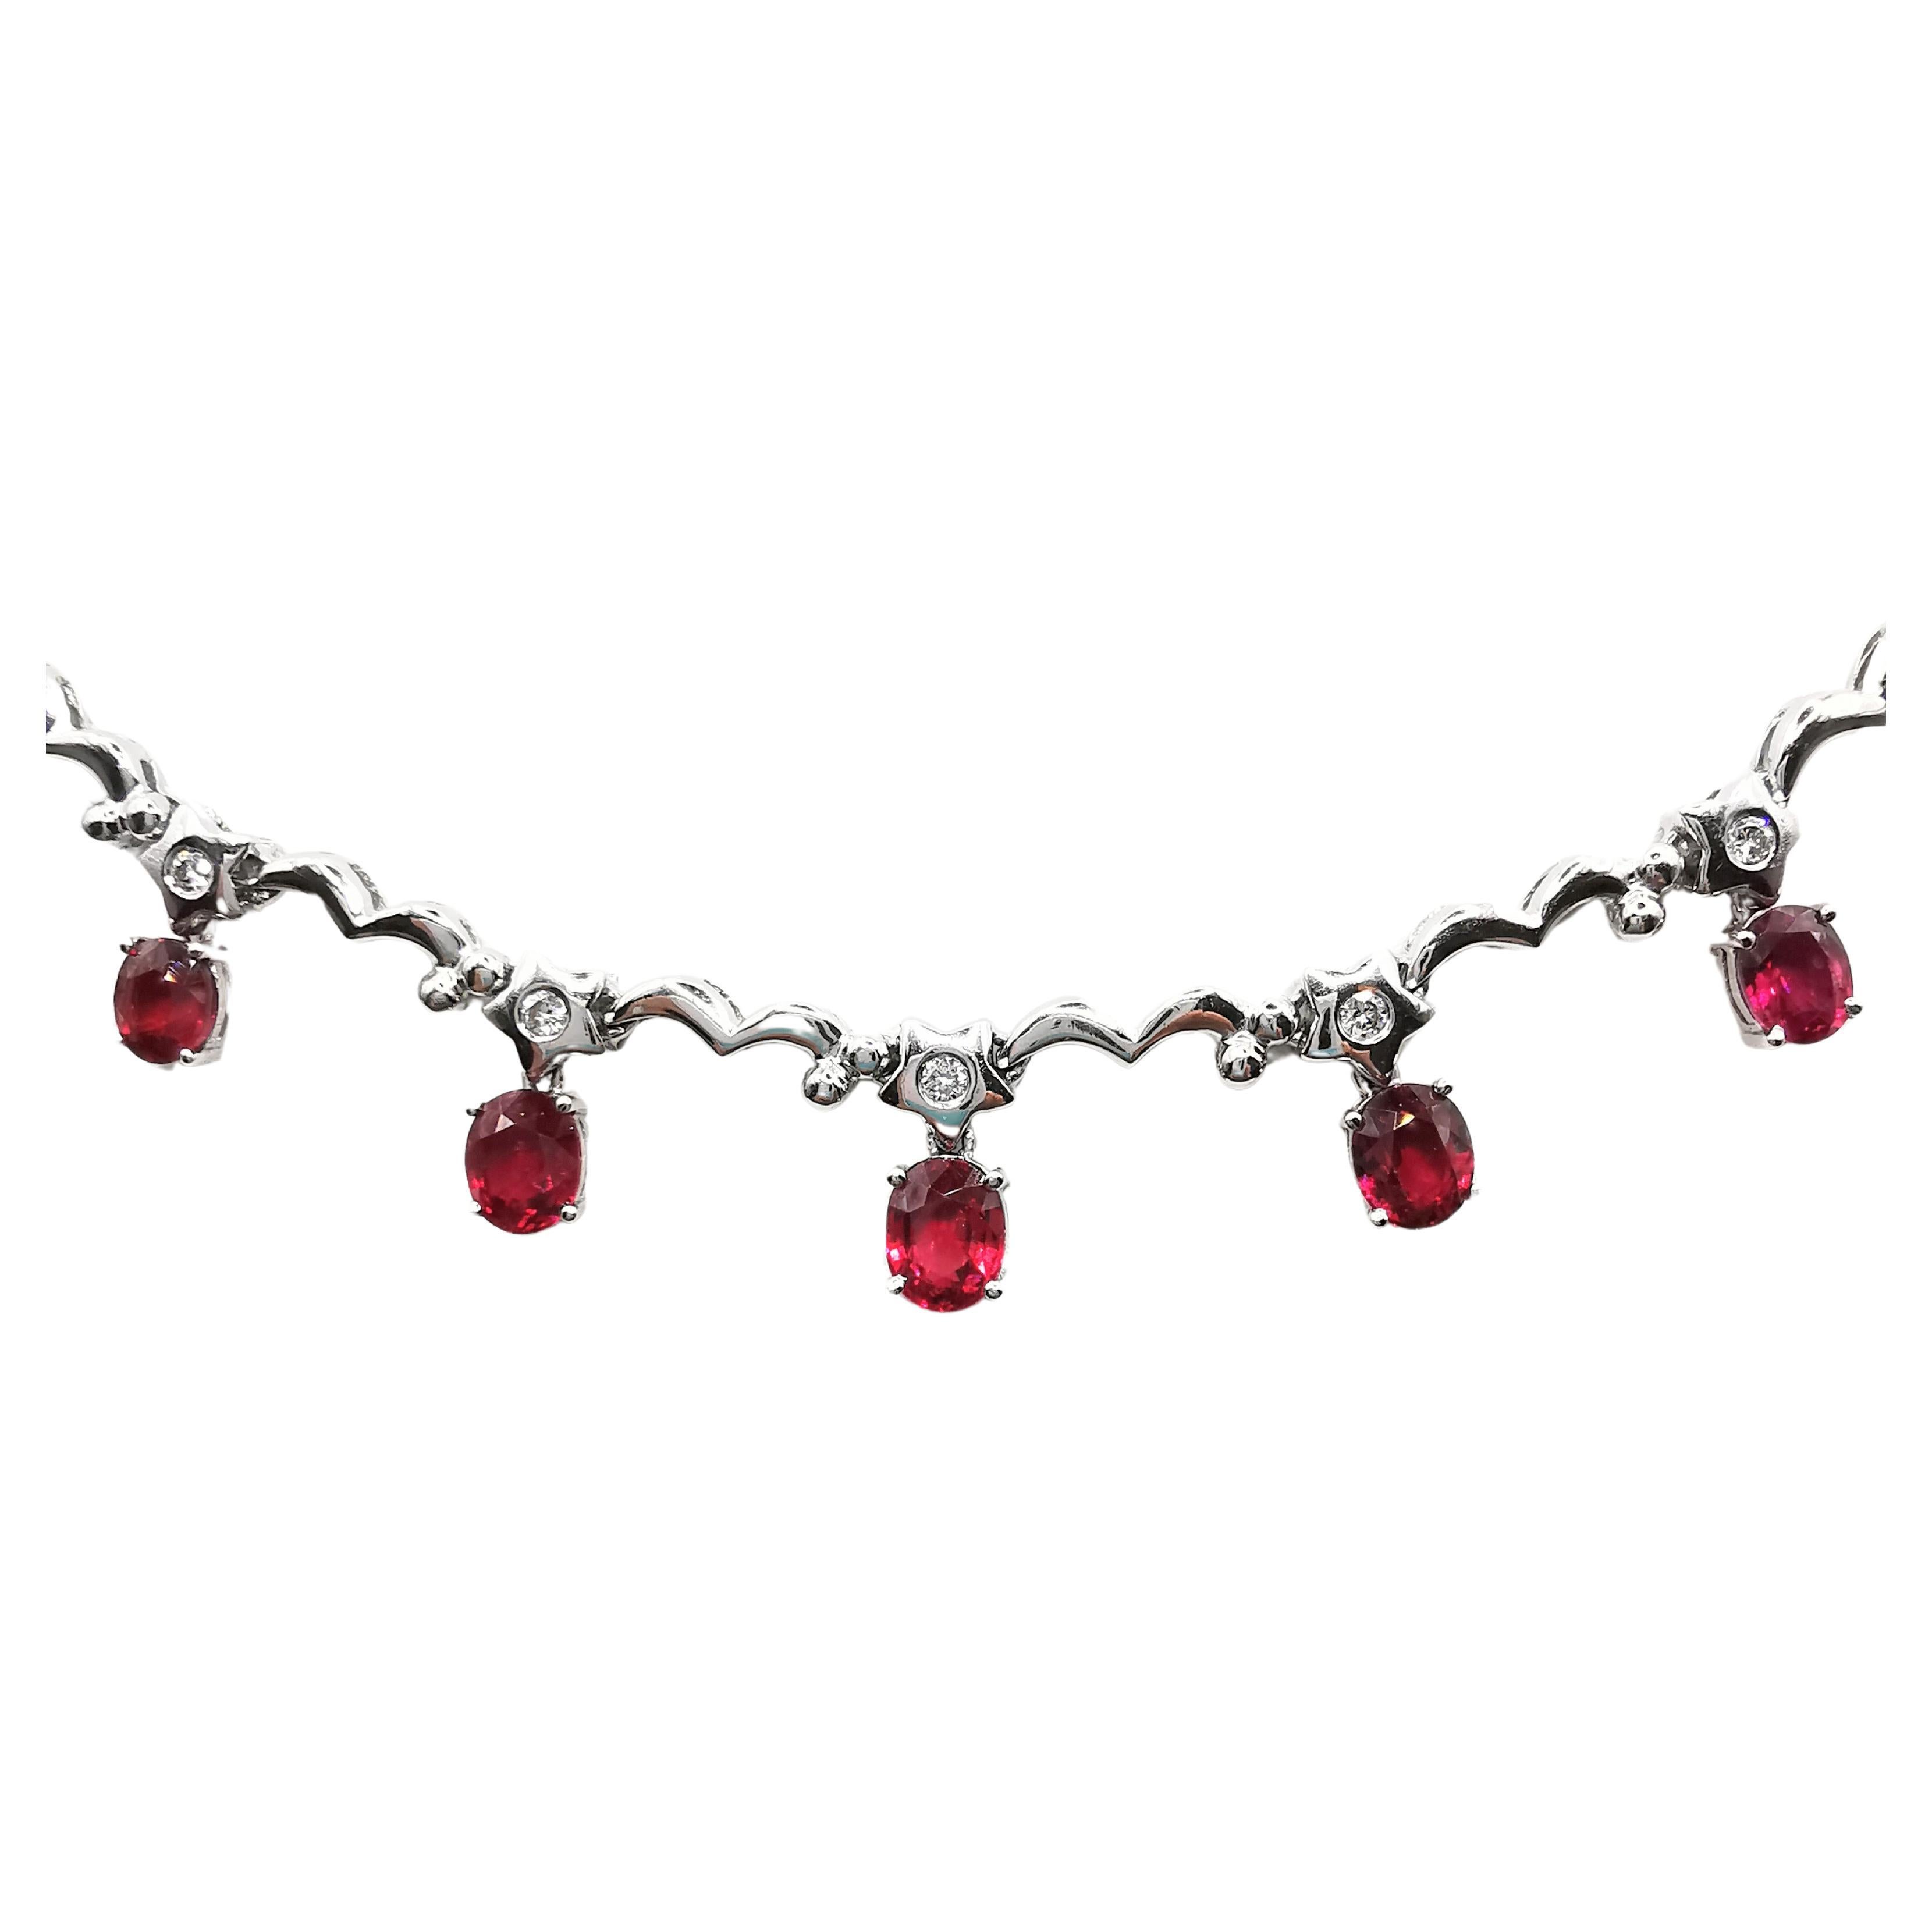 3.49ct Natural Oval Cut Pigeon Blood Ruby and Diamond Necklace in 18K White Gold For Sale